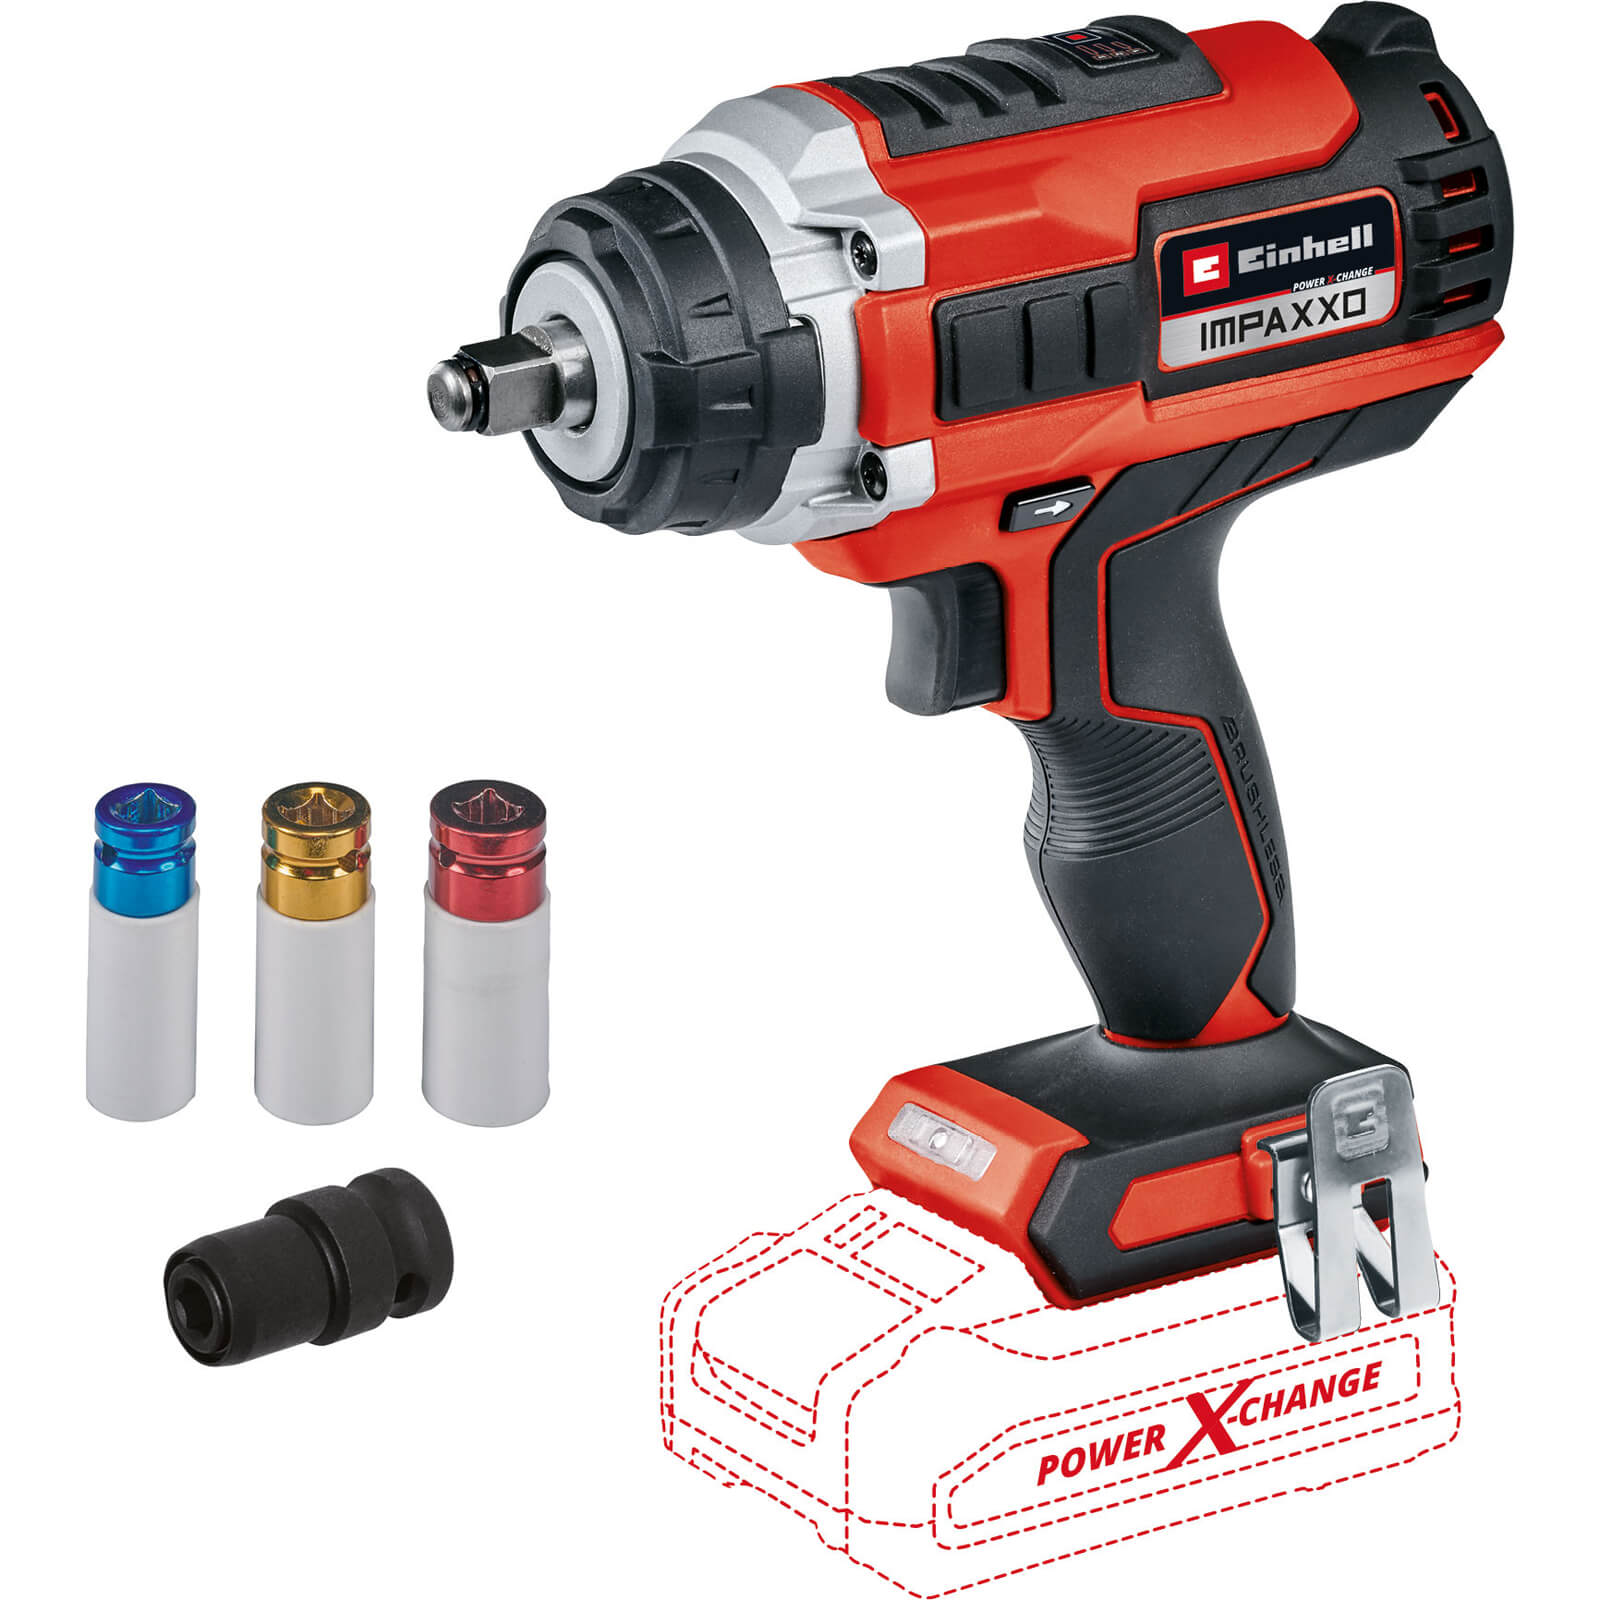 Image of Einhell IMPAXXO 18/400 18v Cordless Brushless 1/2" Impact Wrench No Batteries No Charger No Case